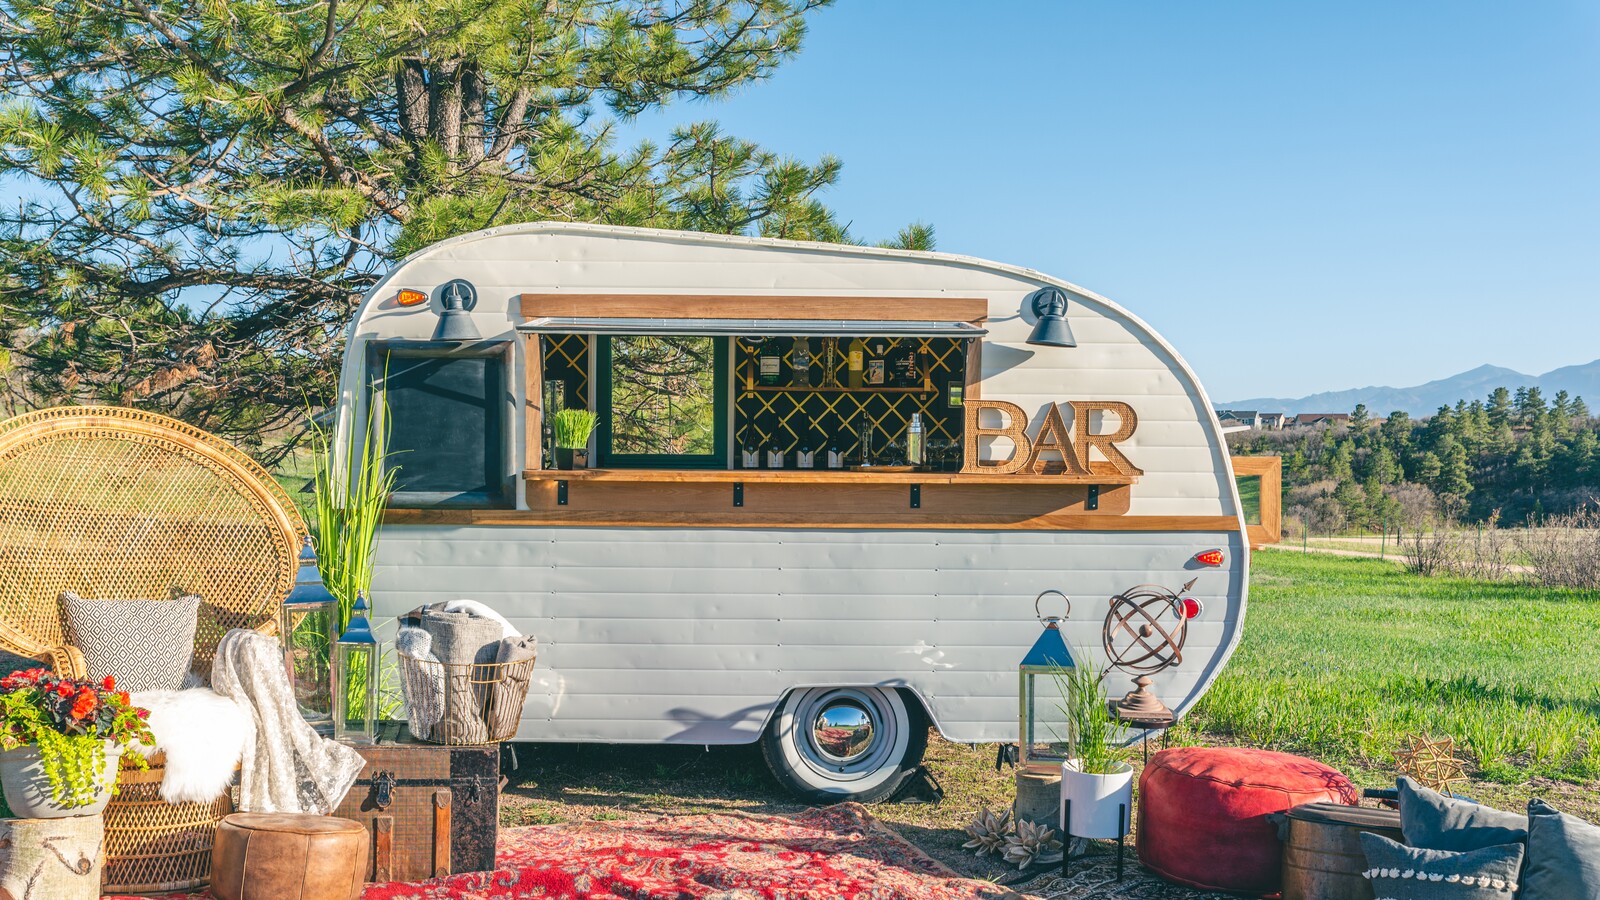 Vintage Vehicles To Mobile Bars